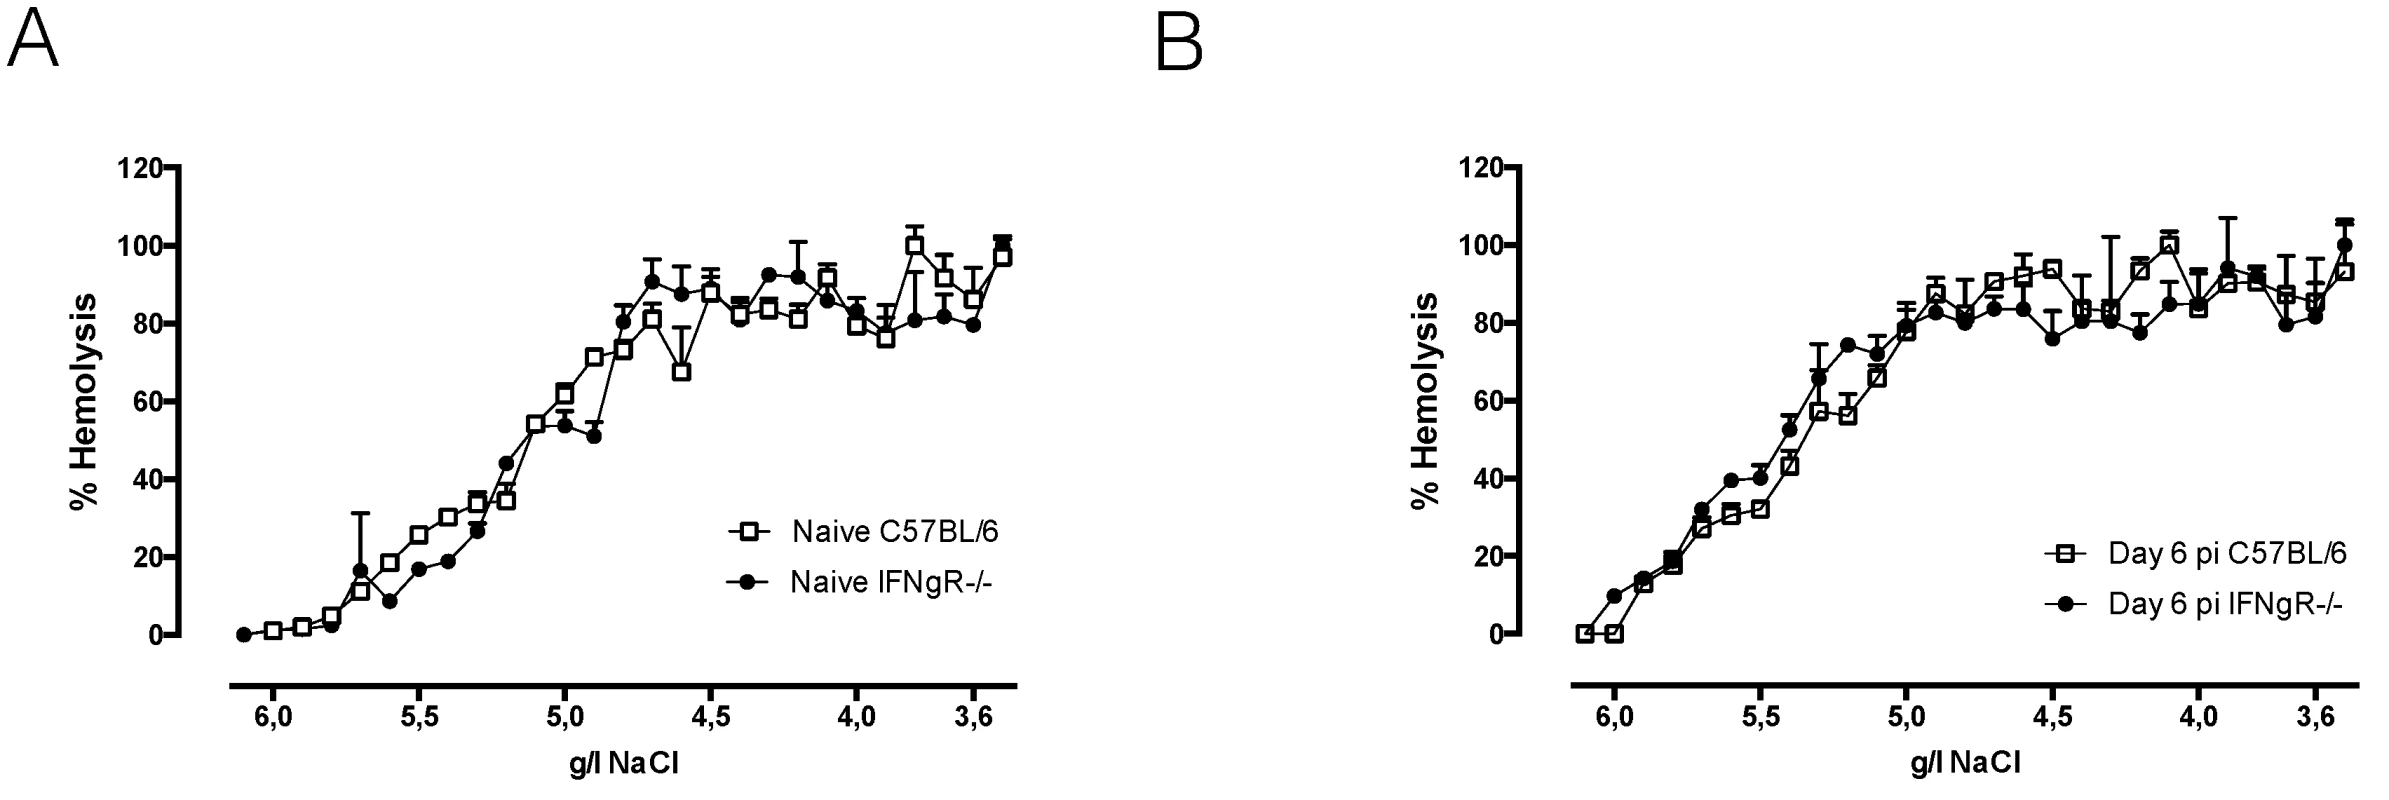 Hemolysis experiment: osmotic fragility profile of naïve (A) or infected (B) RBCs of day six infected C57BL/6 (white line) or IFNγR-/- (black line) mice.